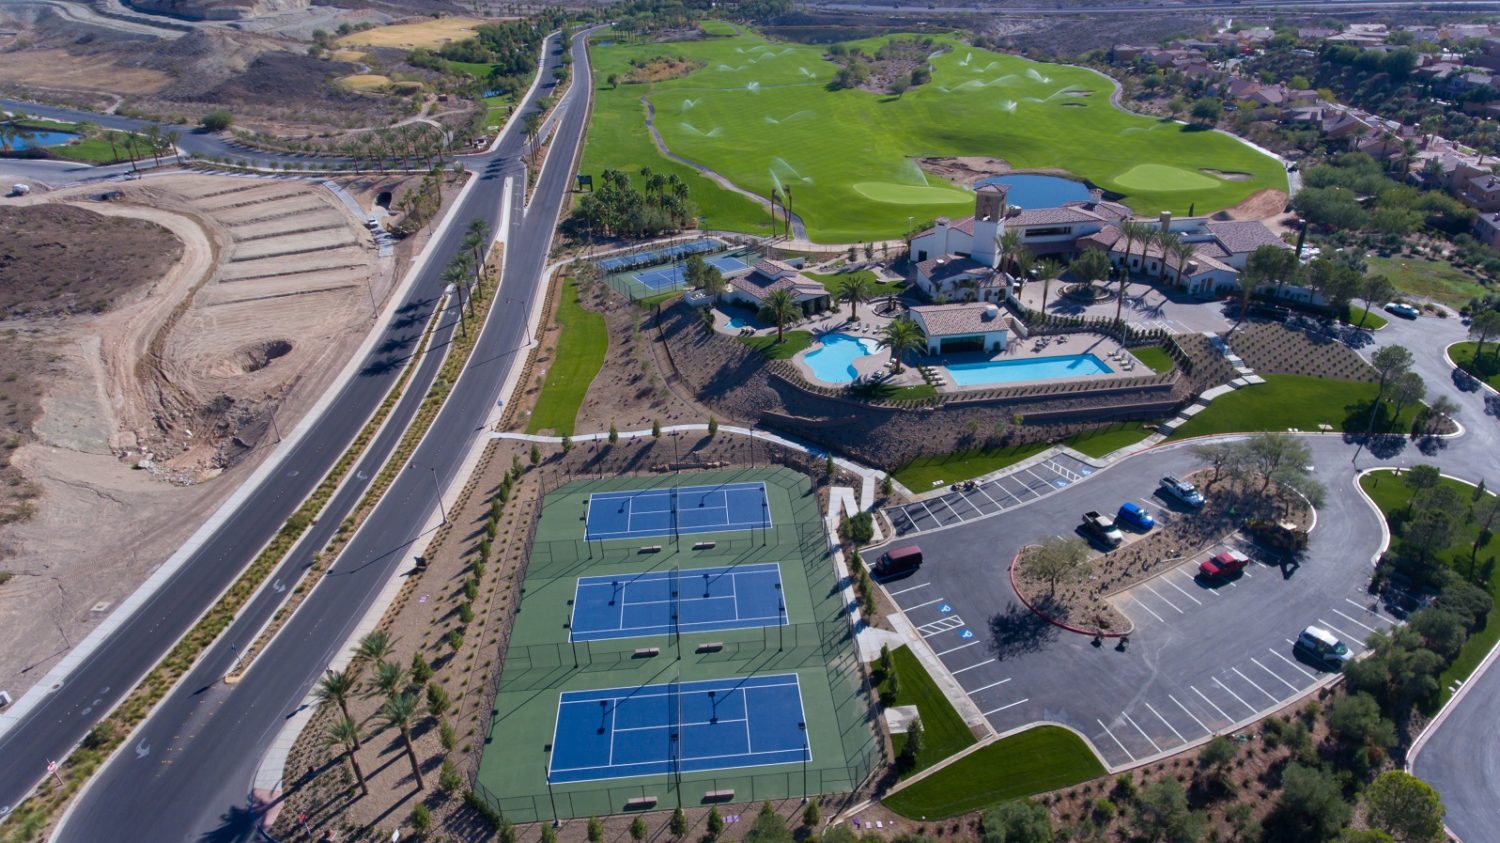 The Lake Las Vegas master plan is adding a very special benefit for its residents with the opening of the new Lake Las Vegas Sports Club in January.